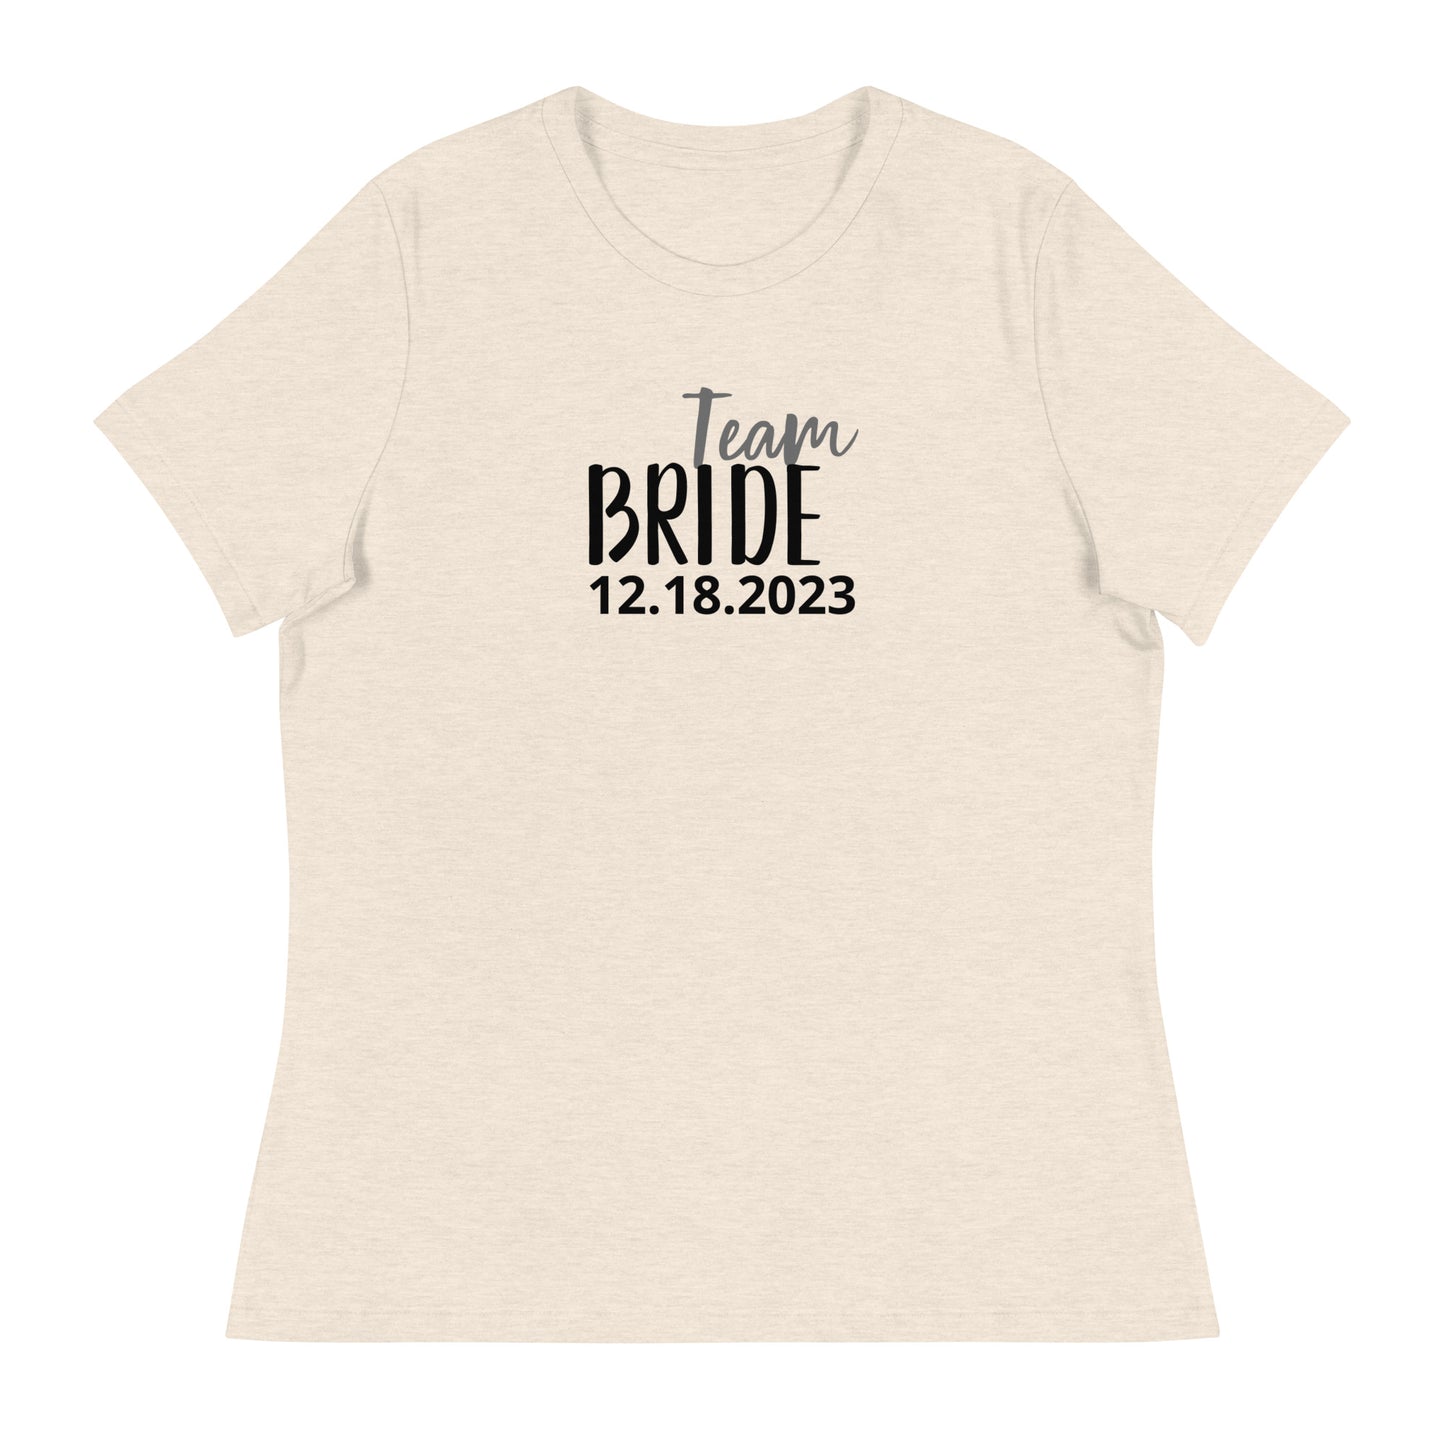 Women's Relaxed Soft & Smooth Premium Quality T-Shirt Personalize Customize Bride Bridesmaids Wedding or Bachelorette Party Design by IOBI Original Apparel